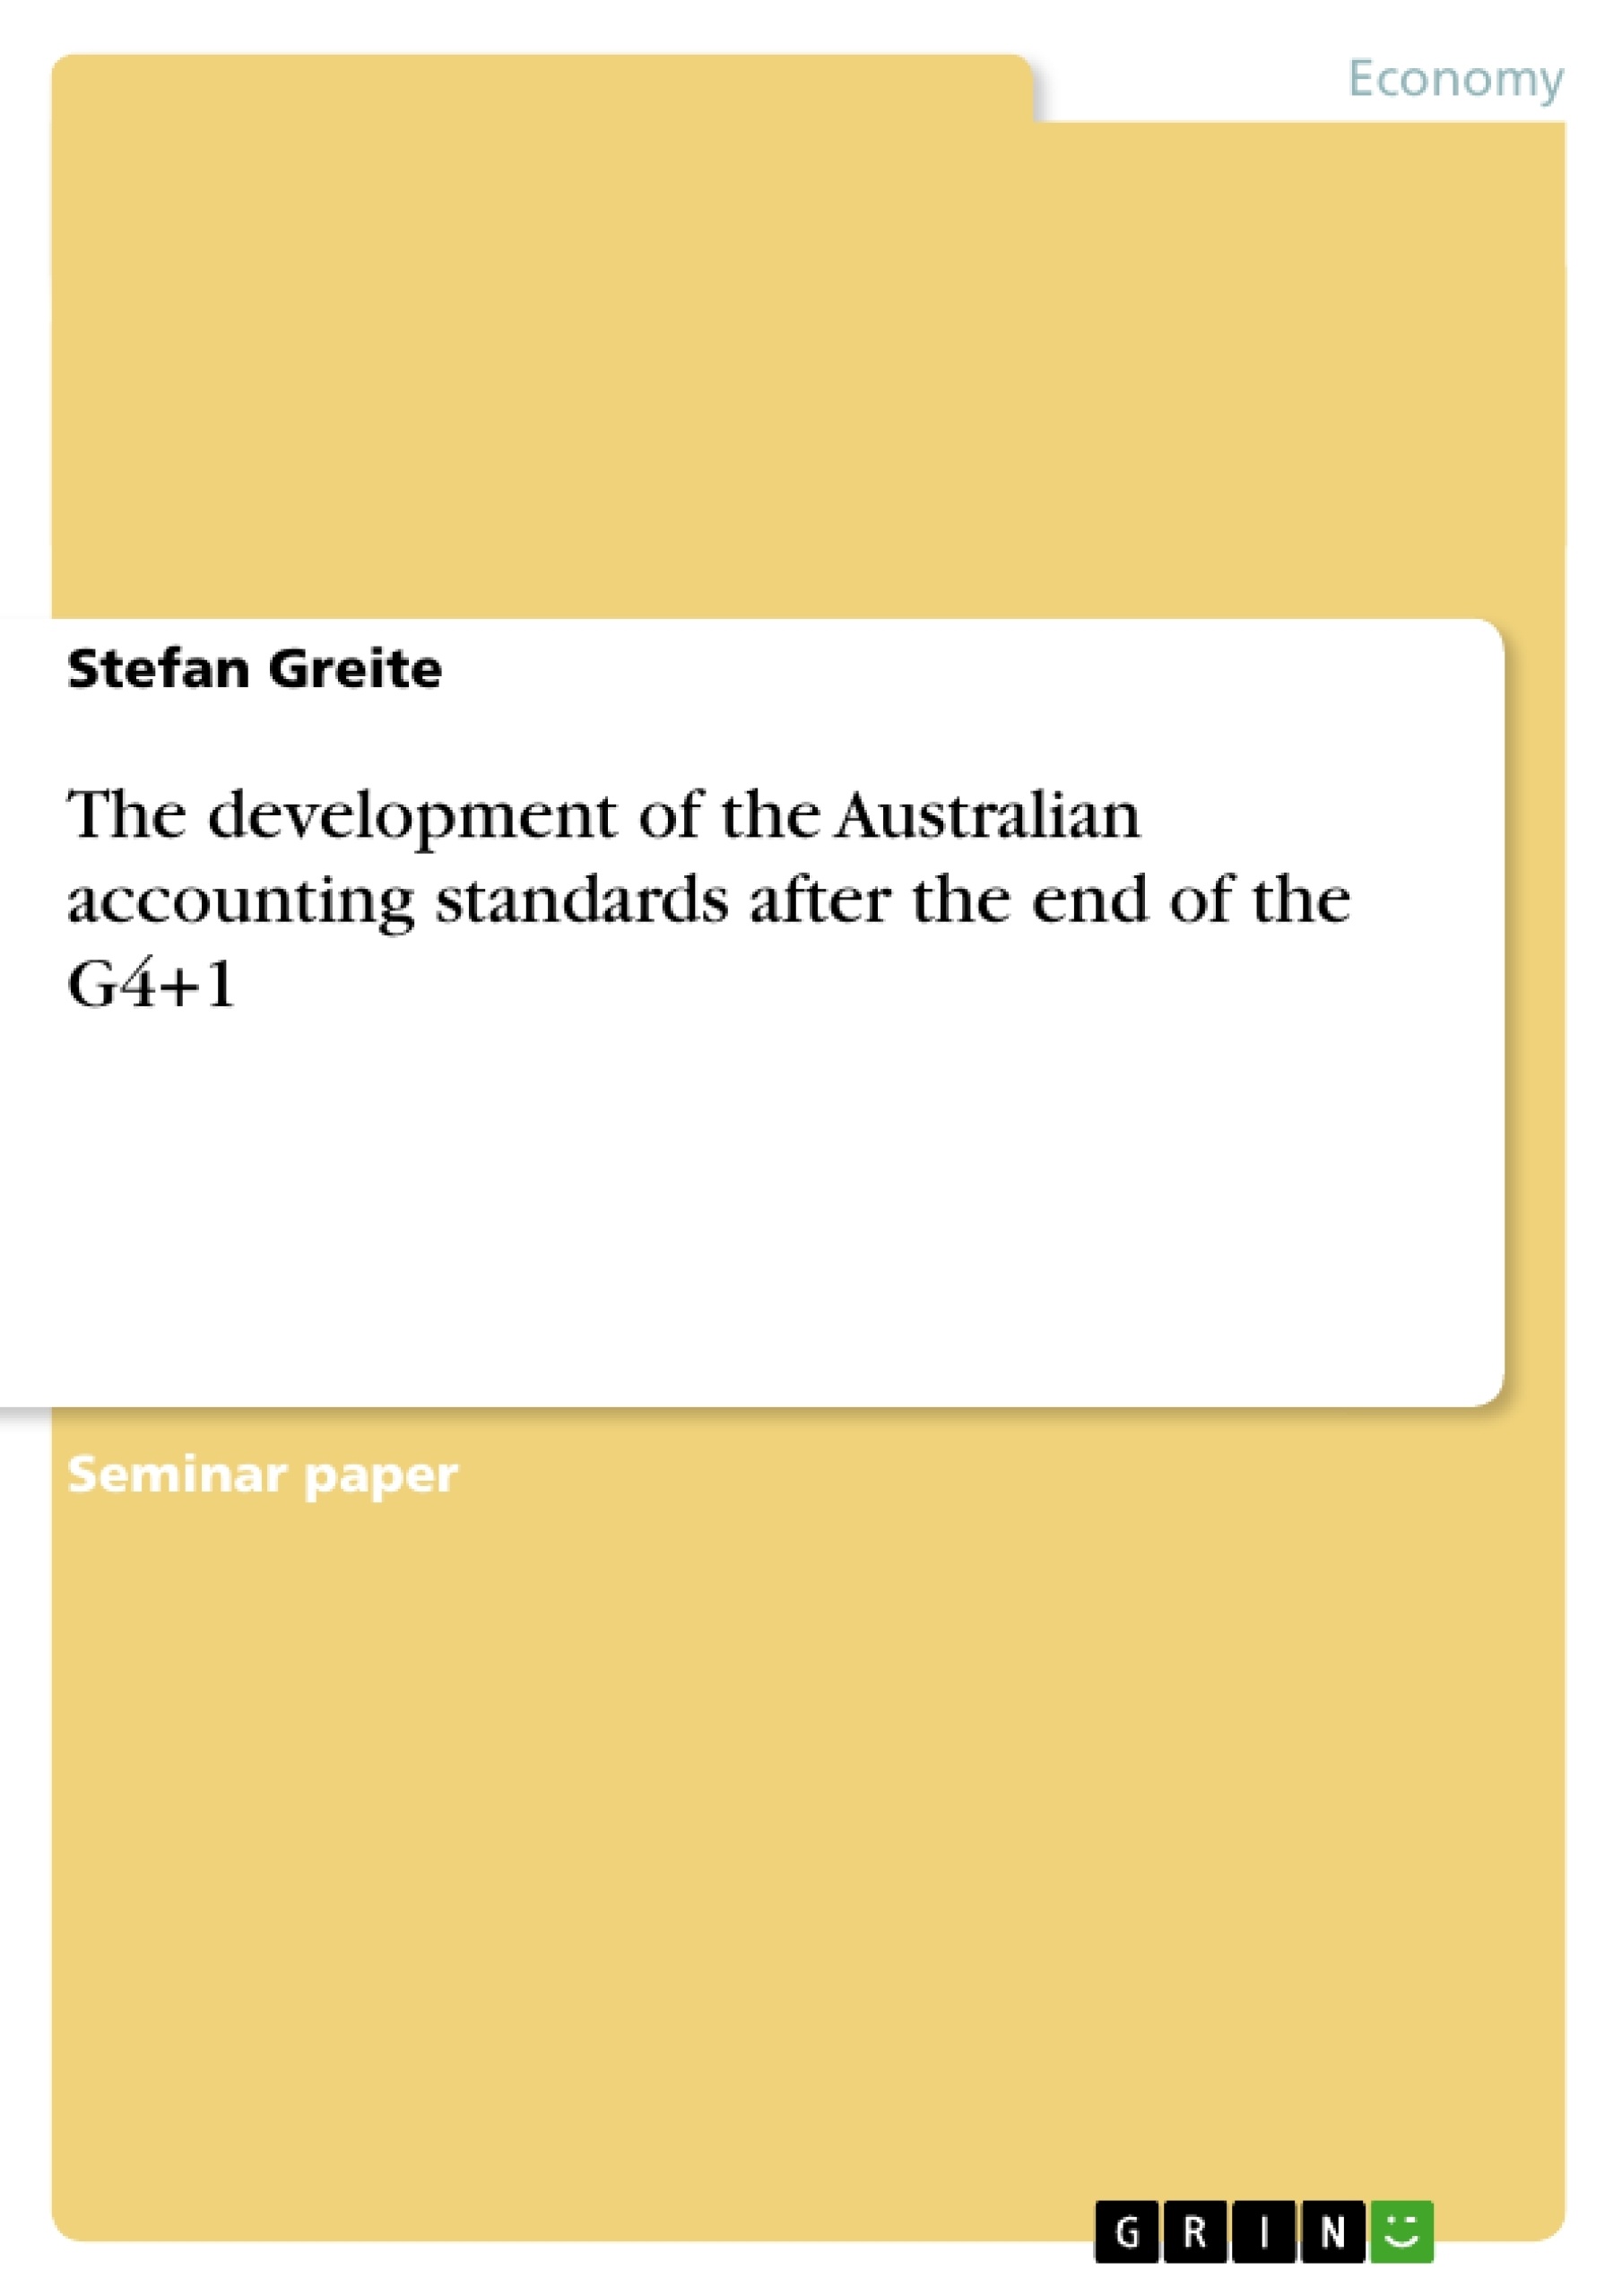 Intim Forklaring skat The development of the Australian accounting standards after the end of the  G4+1 - GRIN